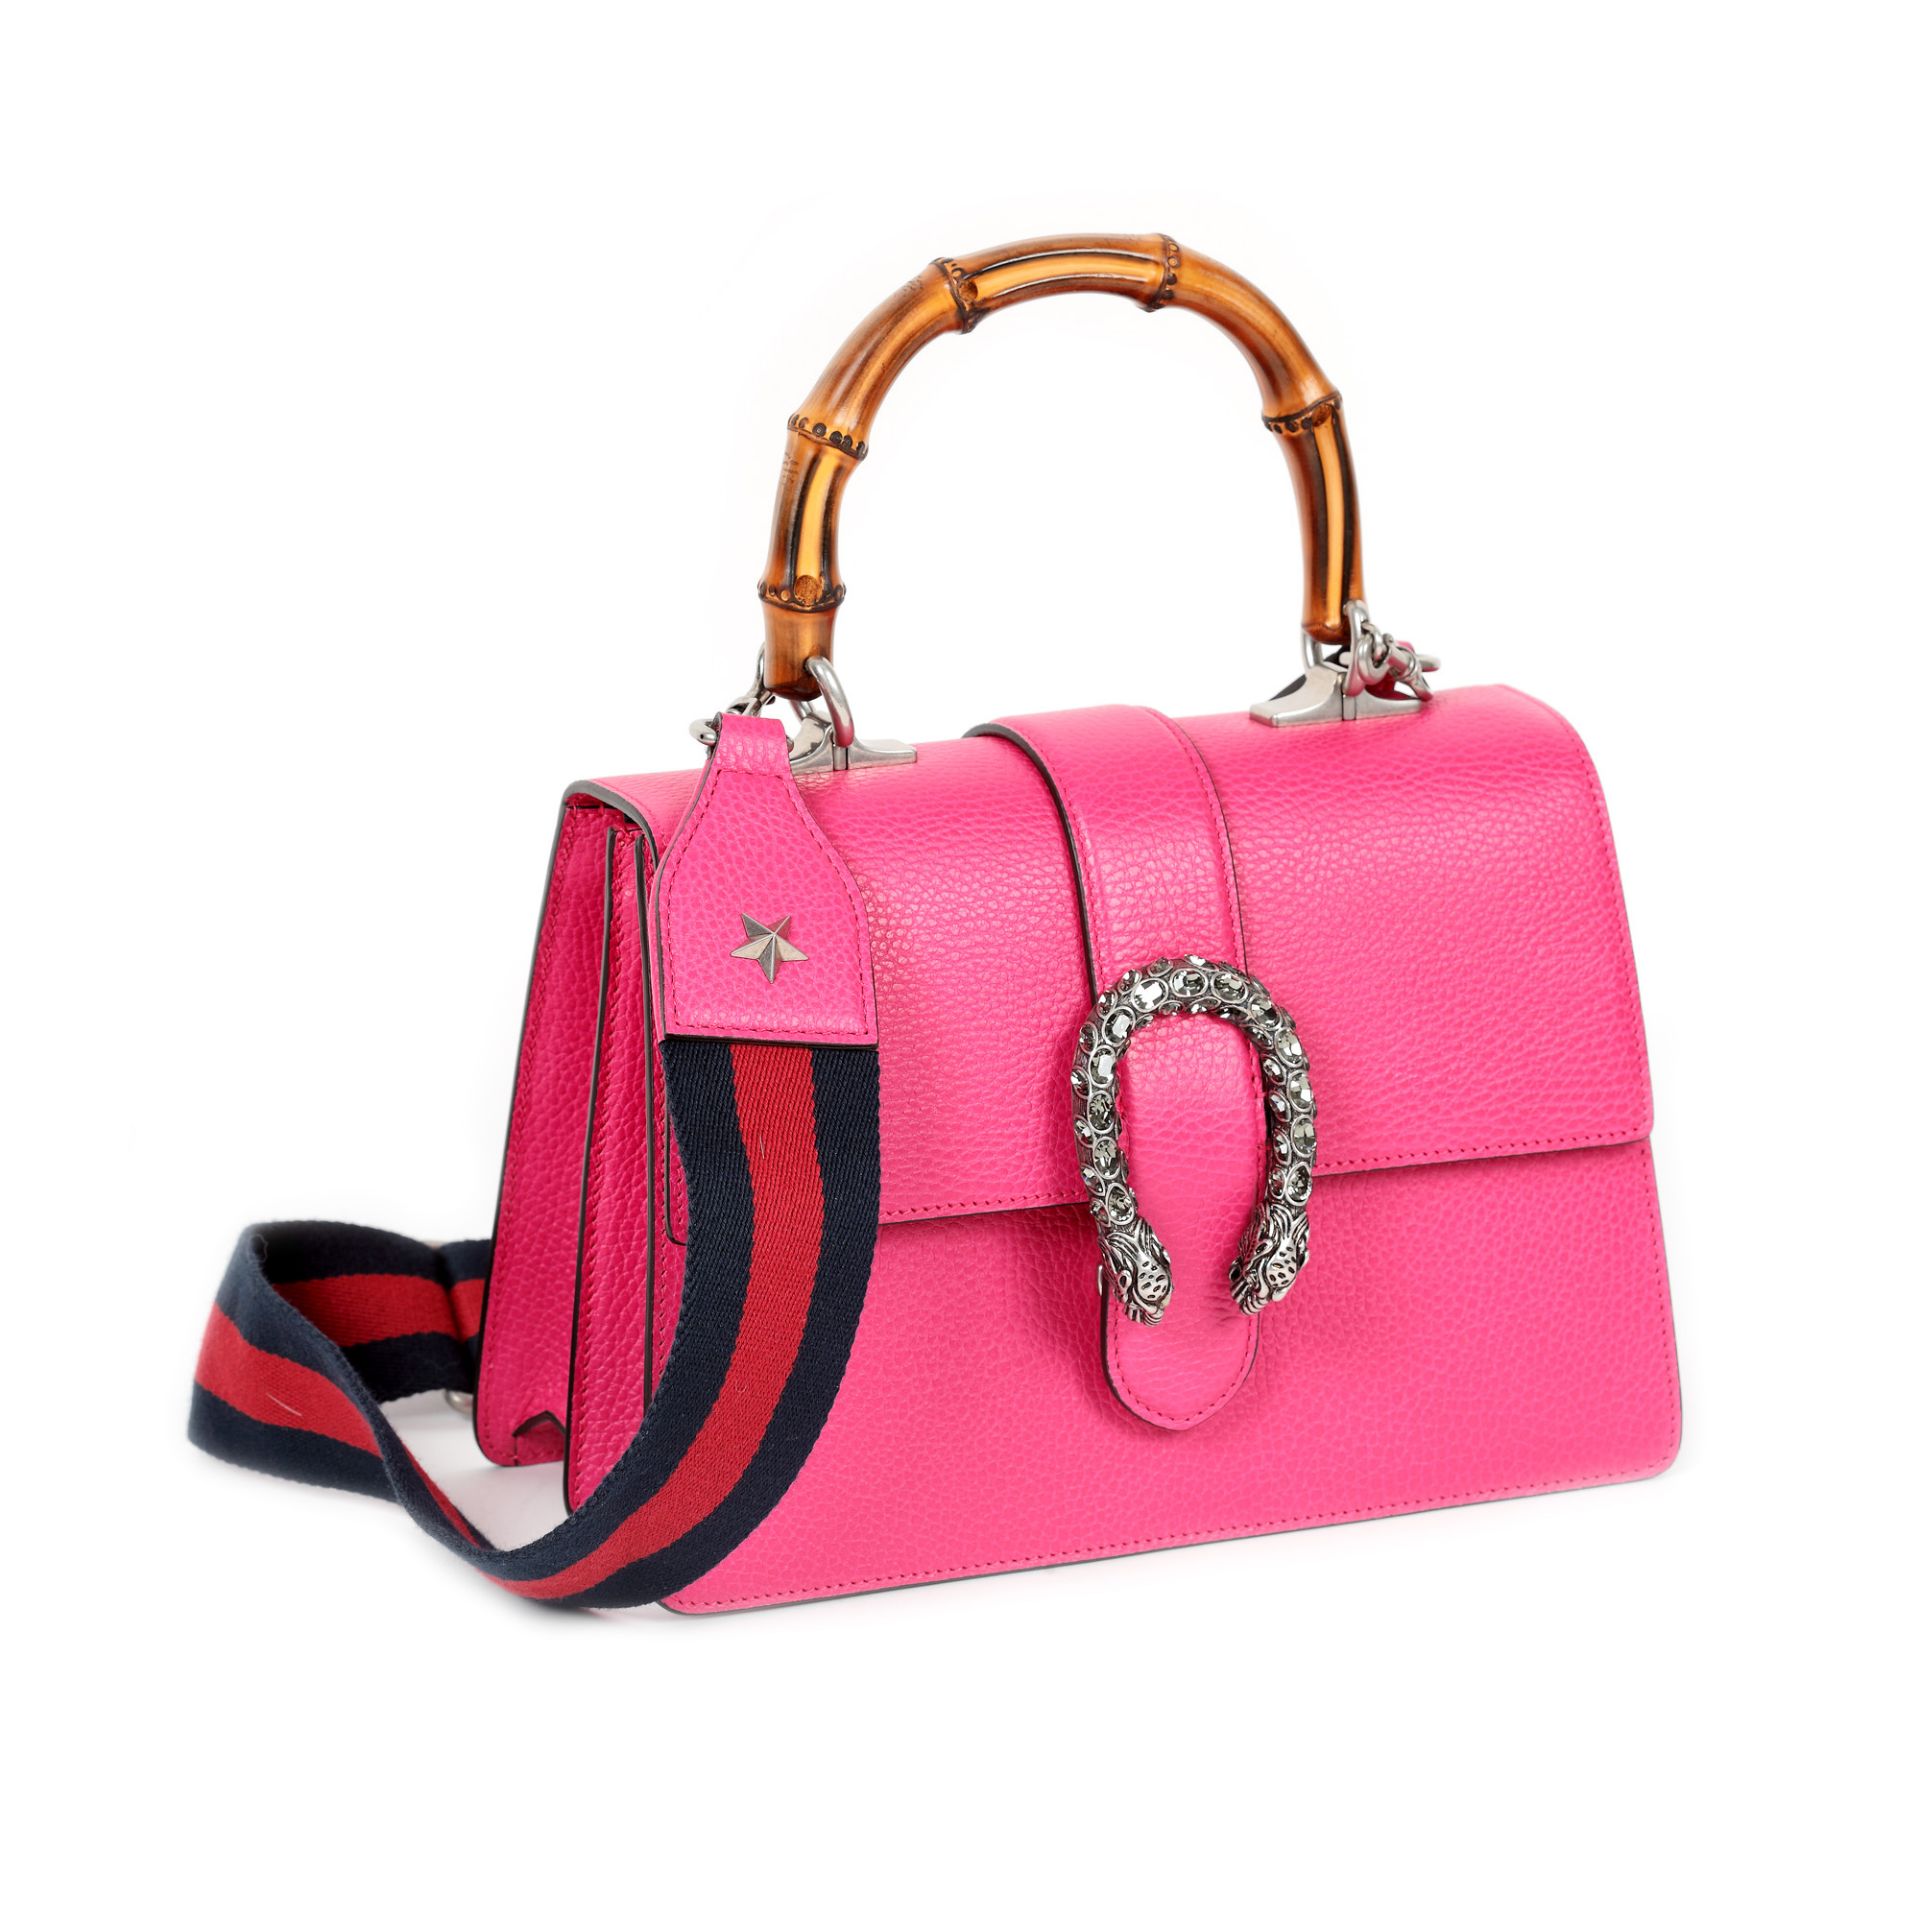 "Dionysus" - Gucci bag, leather, pink, decorated with bamboo handle - Image 4 of 5